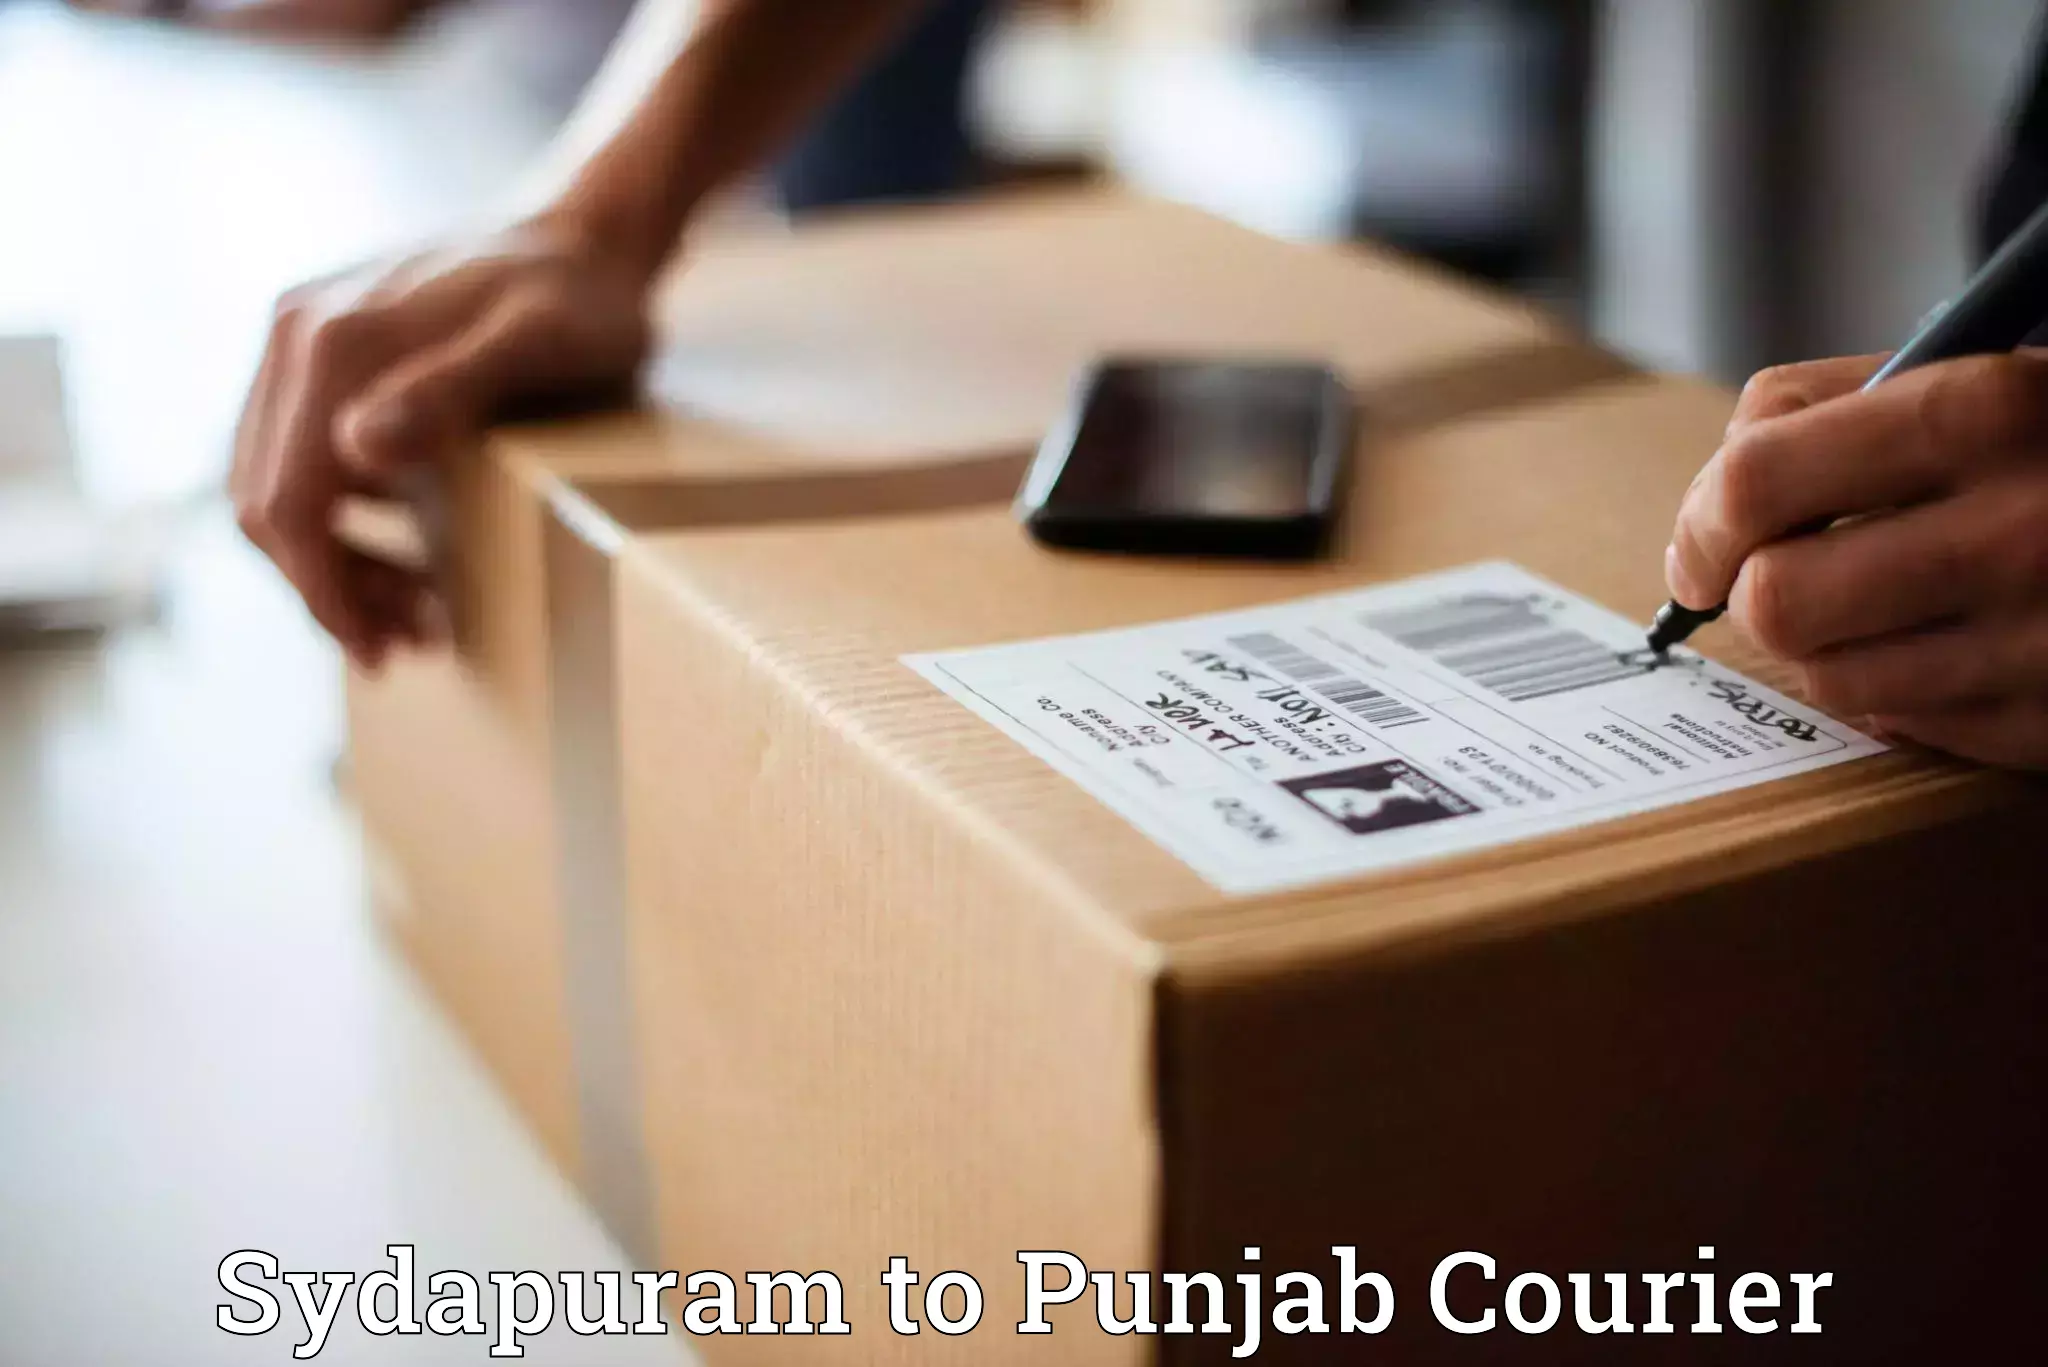 Courier service comparison Sydapuram to Thapar Institute of Engineering and Technology Patiala